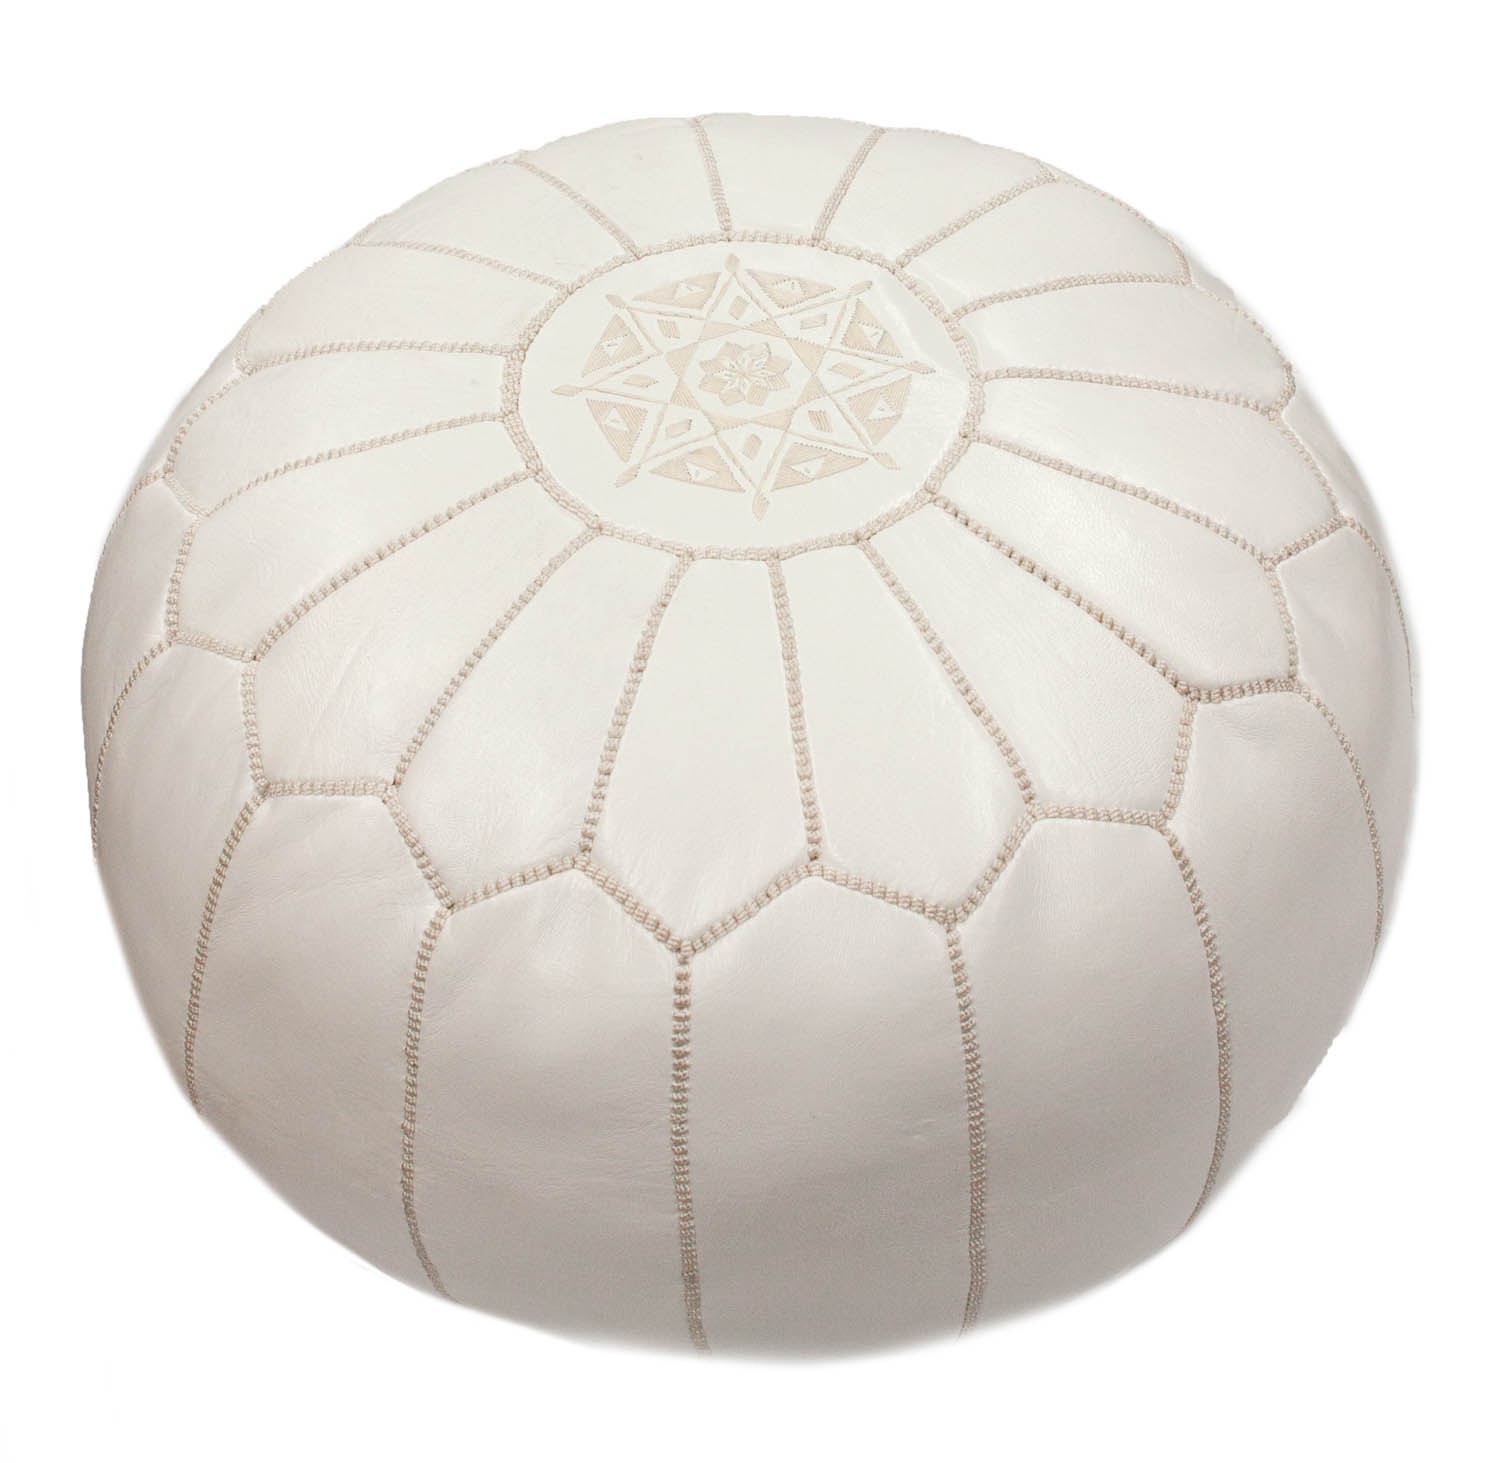 Nuloom Handmade Casual Living Leather Moroccan Ottoman Pouf